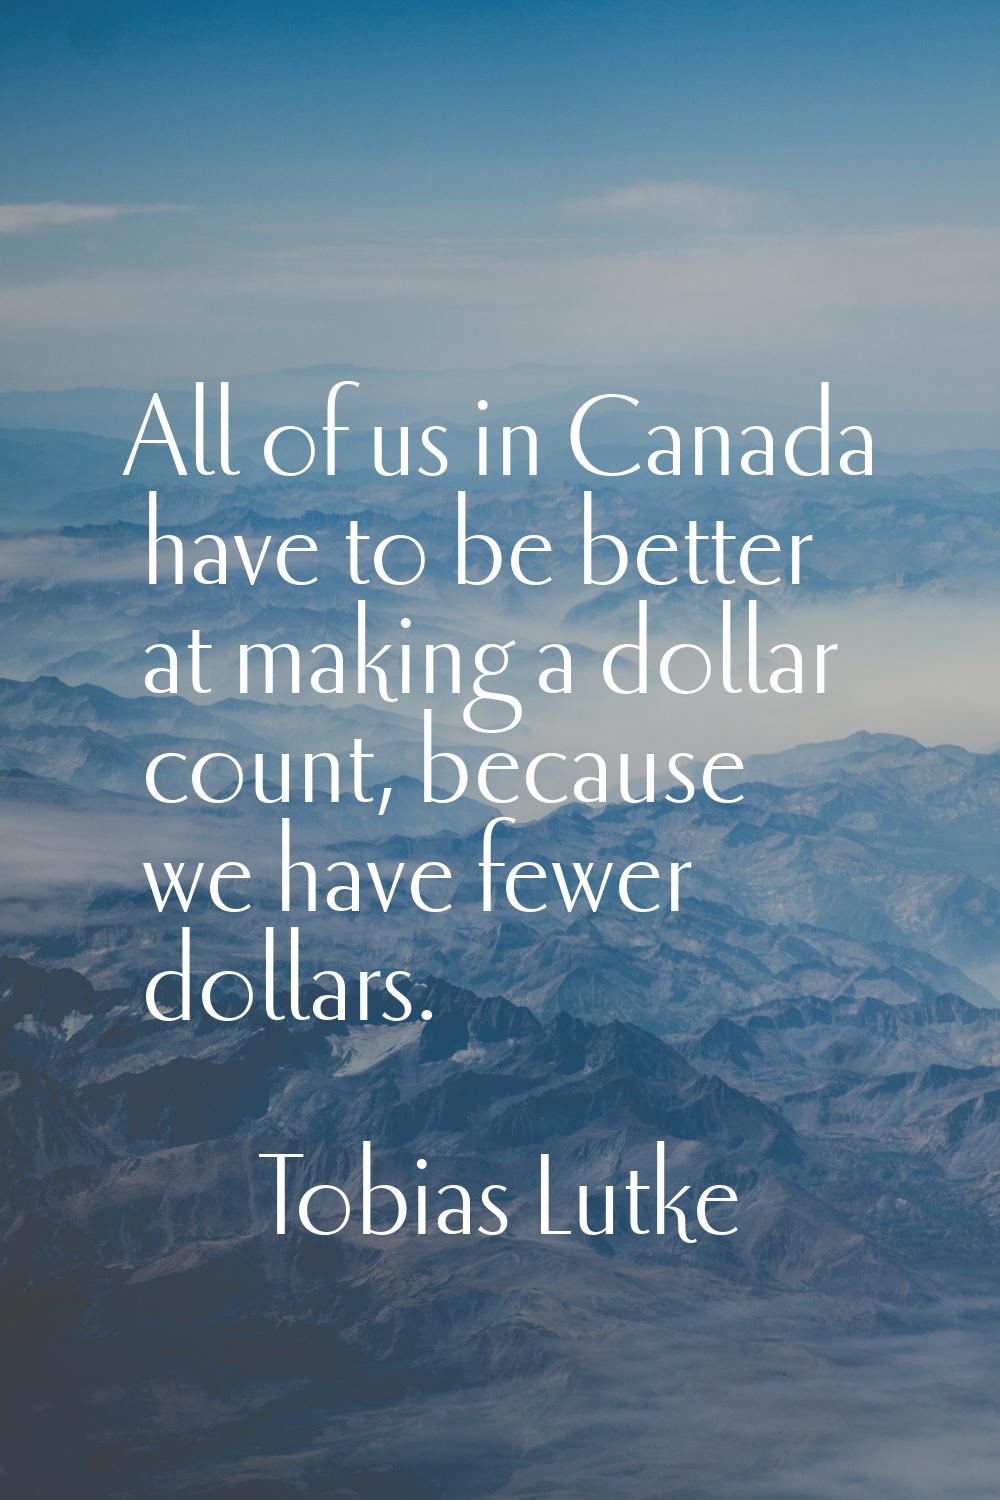 All of us in Canada have to be better at making a dollar count, because we have fewer dollars.